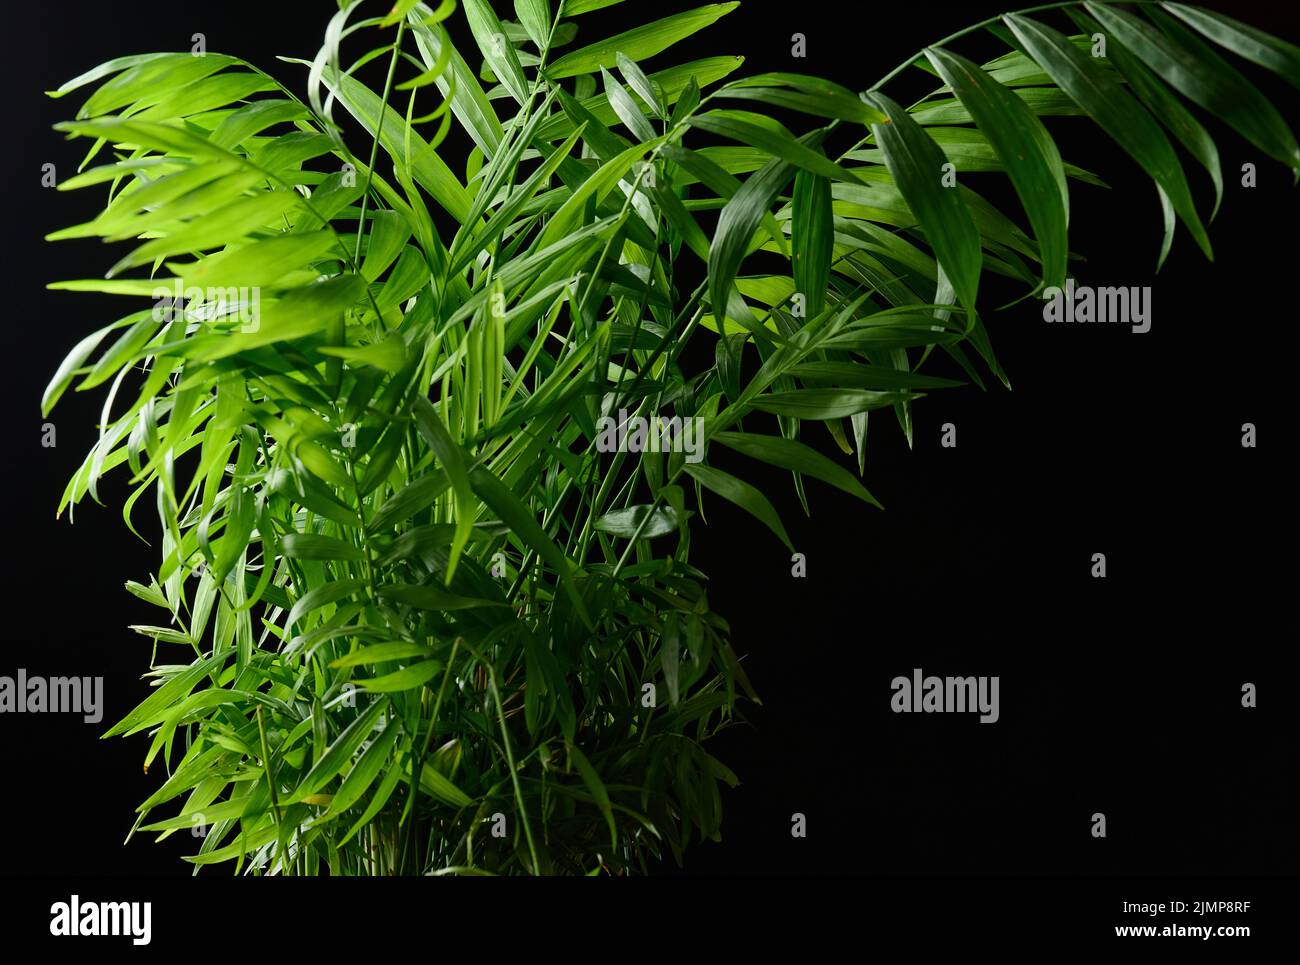 Growing palm tree bush in a pot on a black background Stock Photo